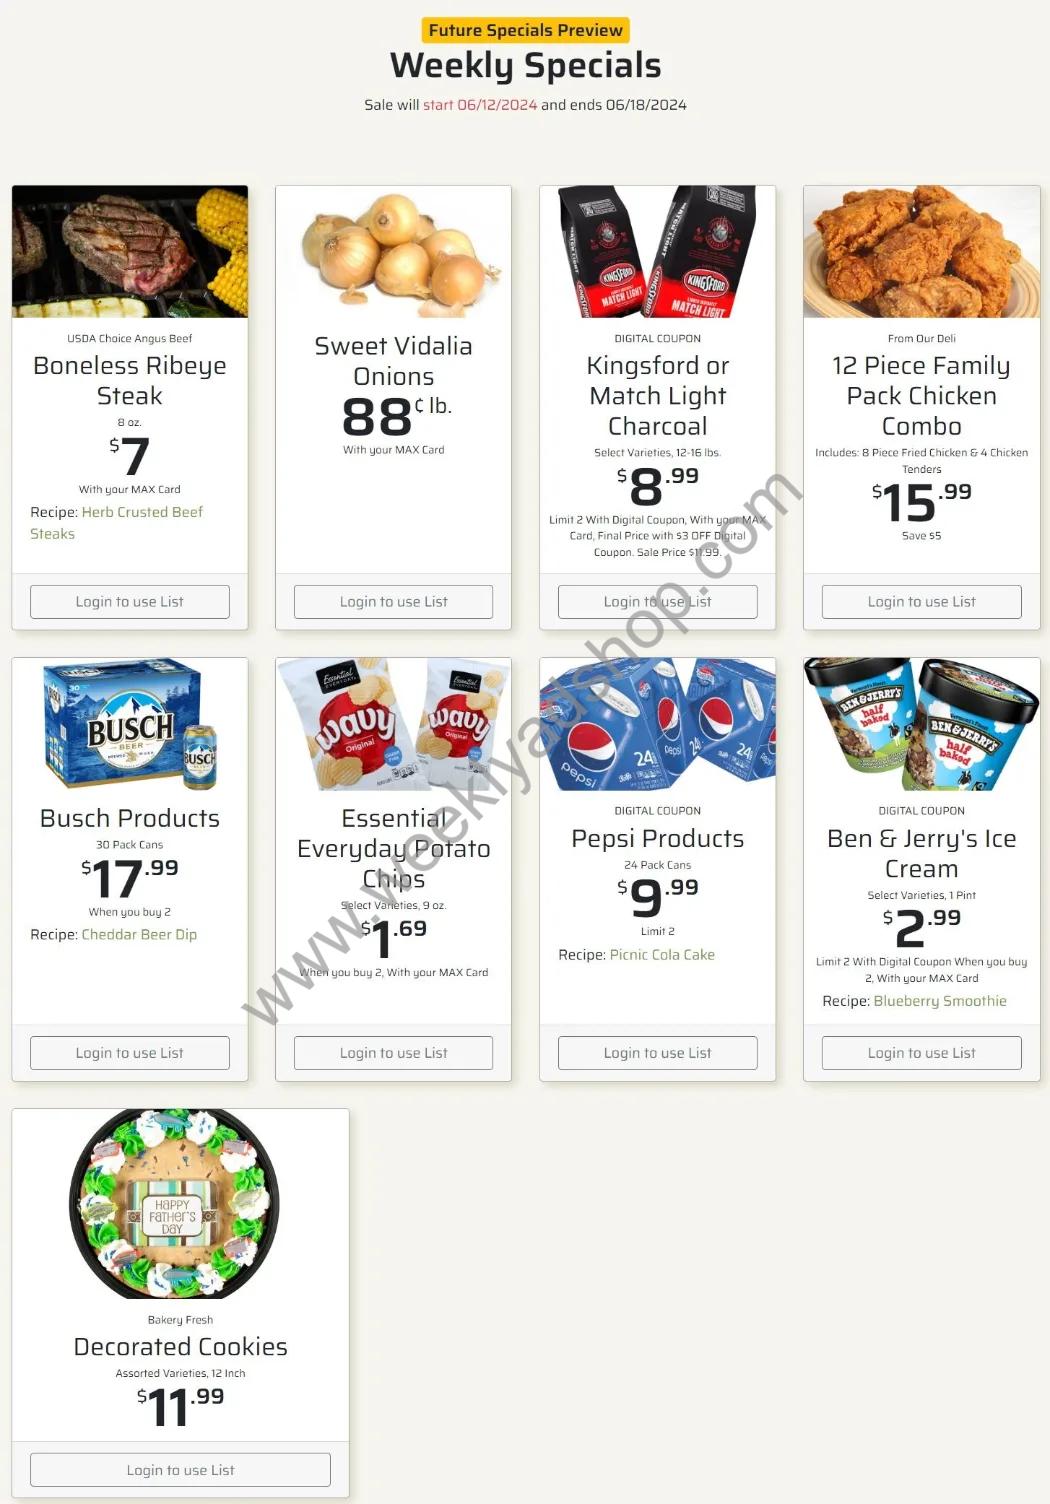 County Market Weekly Ad July 2024 Weekly Sales, Deals, Discounts and Digital Coupons.